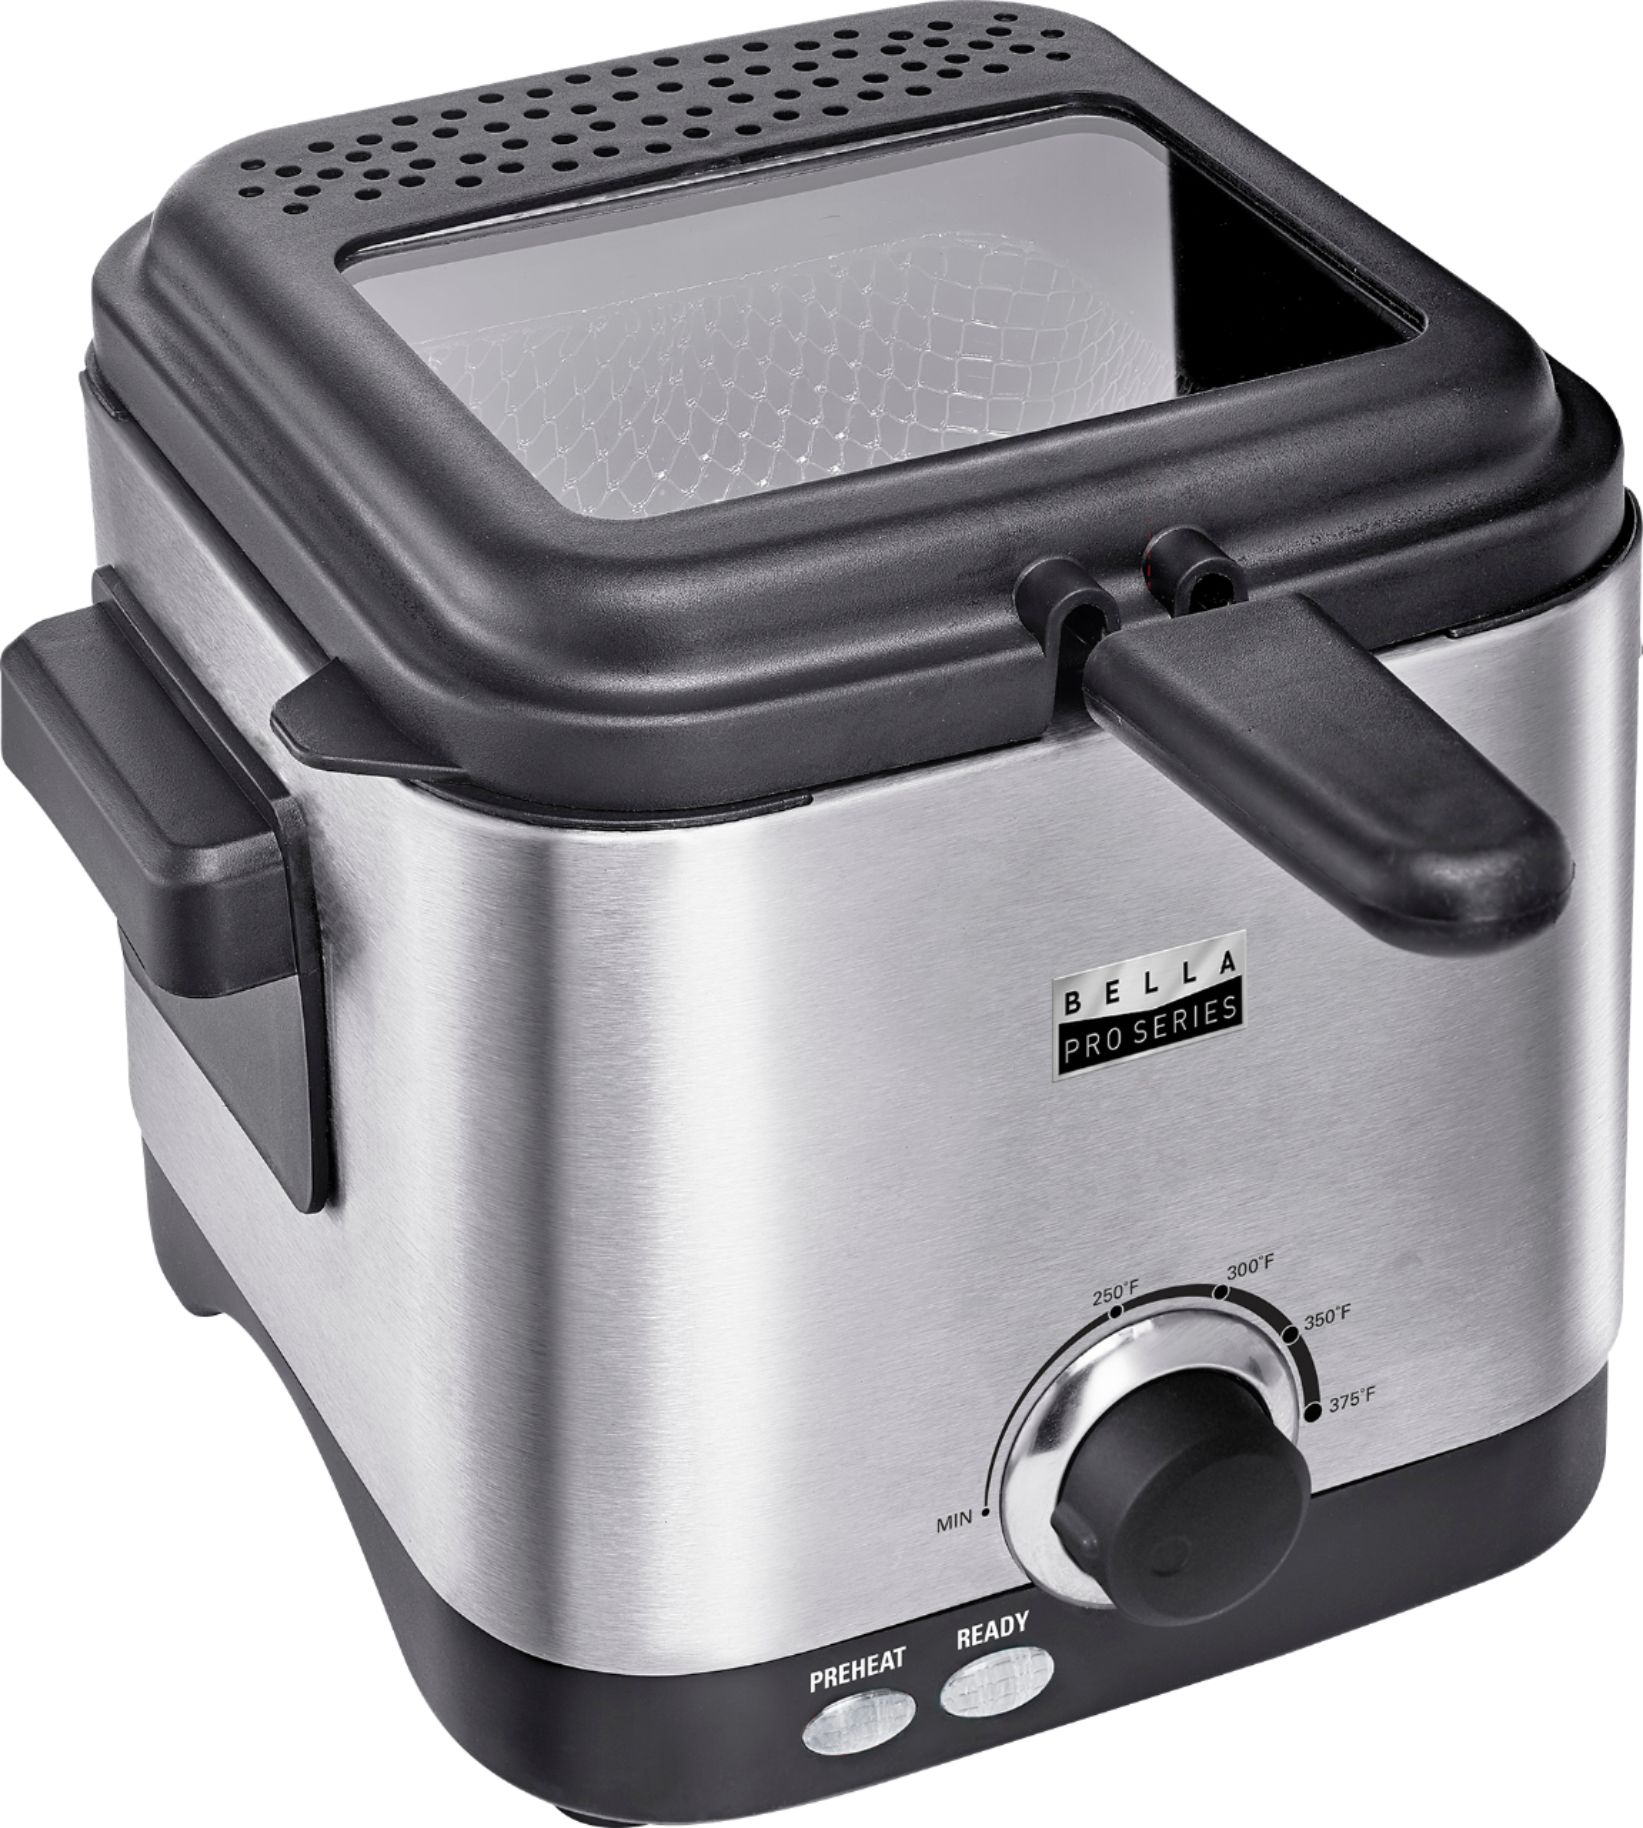 Angle View: Bella Pro Series - 1.6-qt. Deep Fryer - Stainless Steel